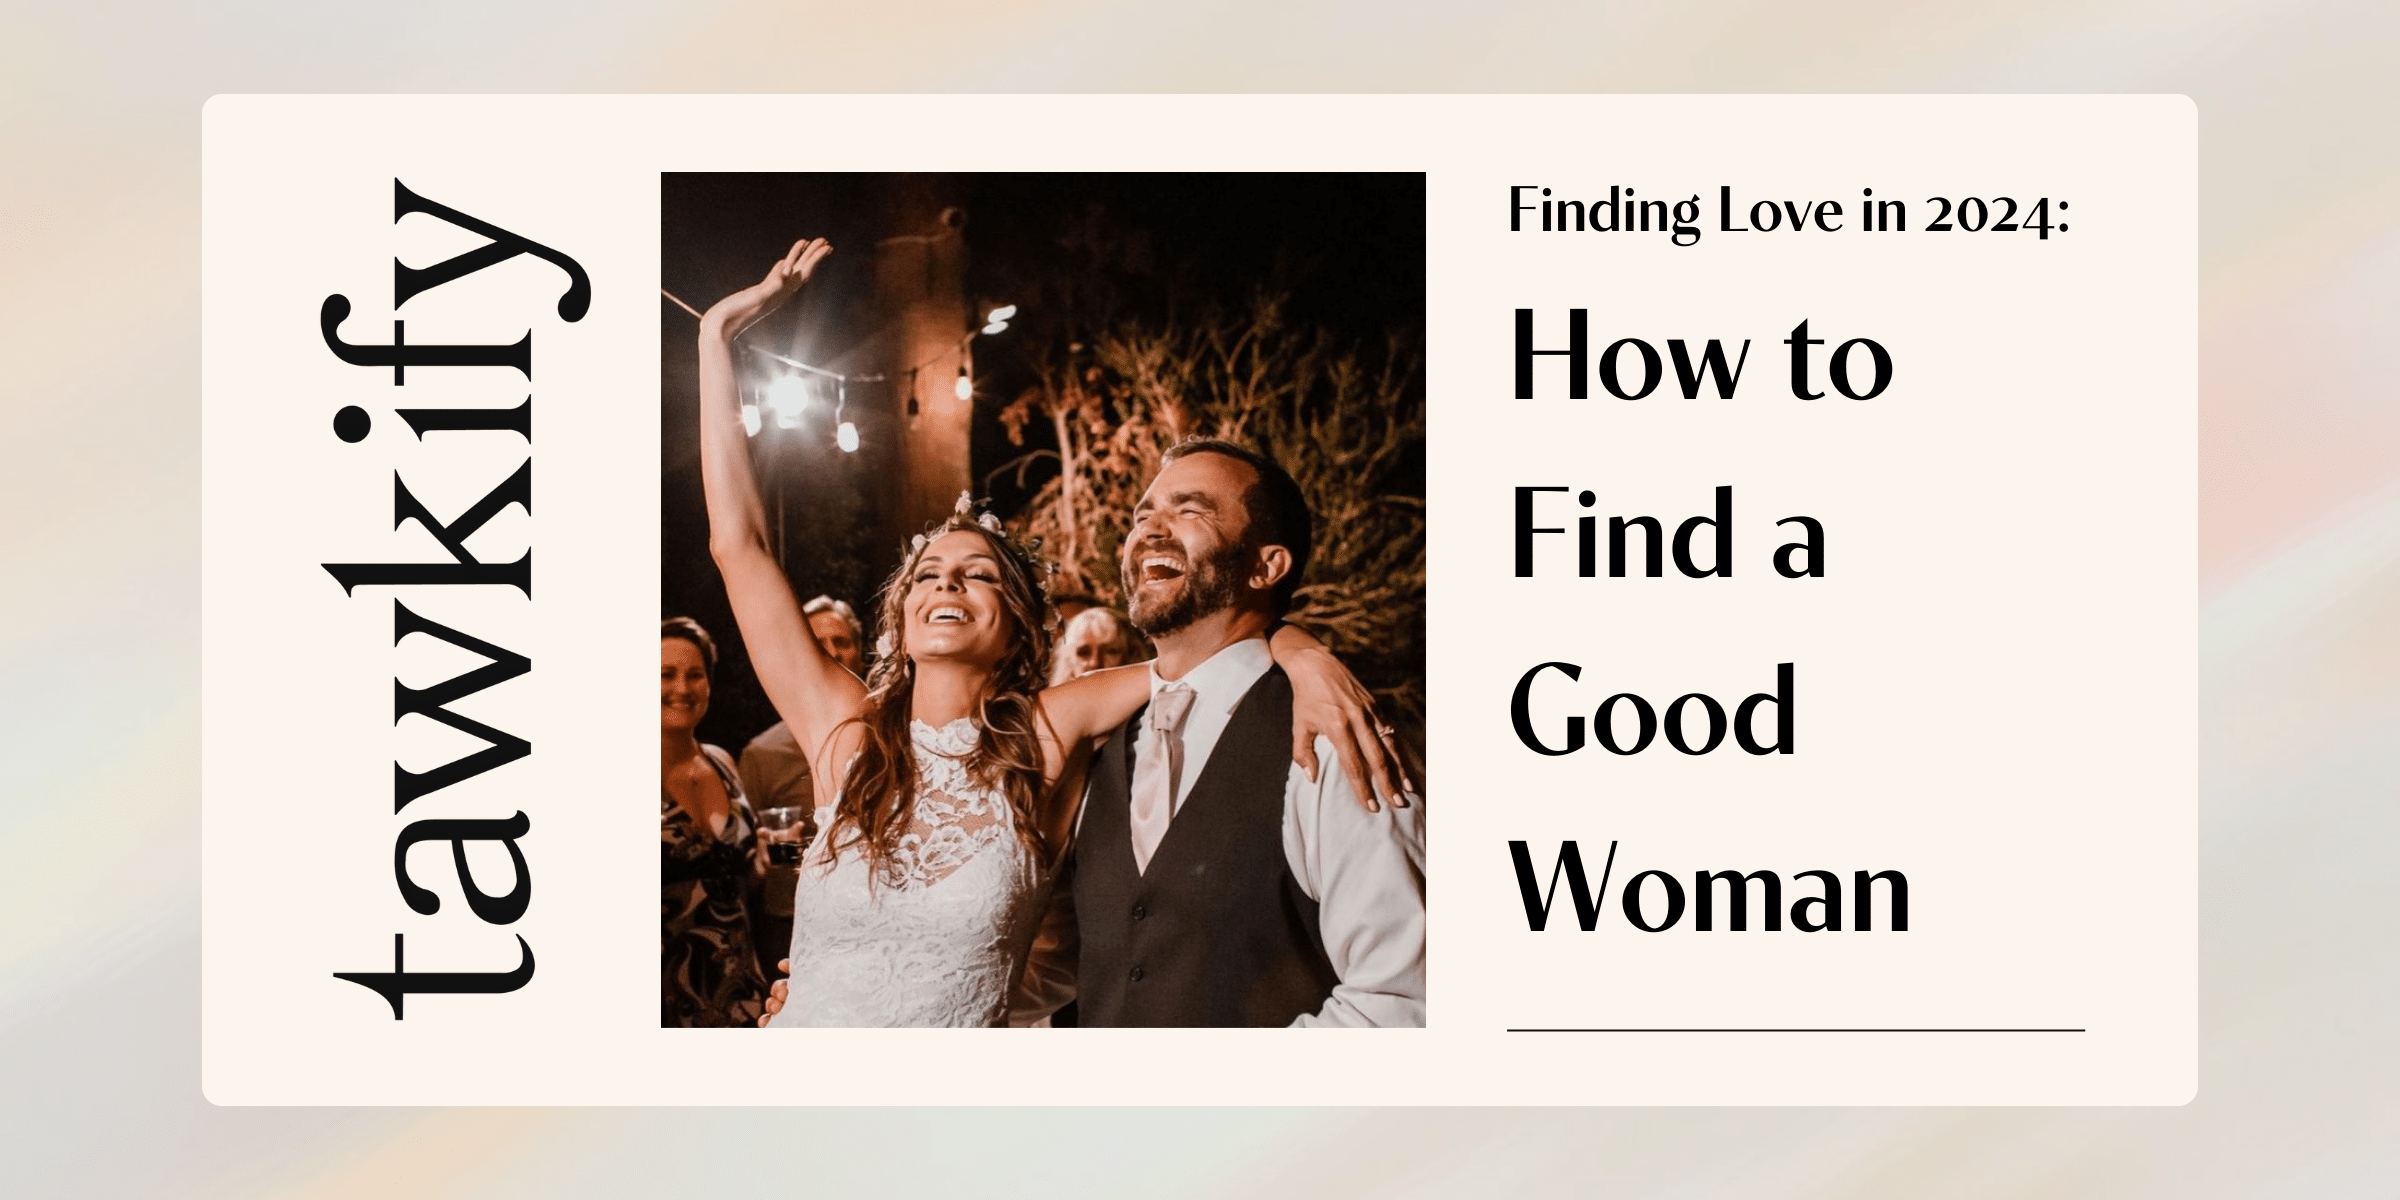 Want to know how to find a good woman, but not sure where to start? Read our tips that help demystify the dating process and make the search for love more intentional.